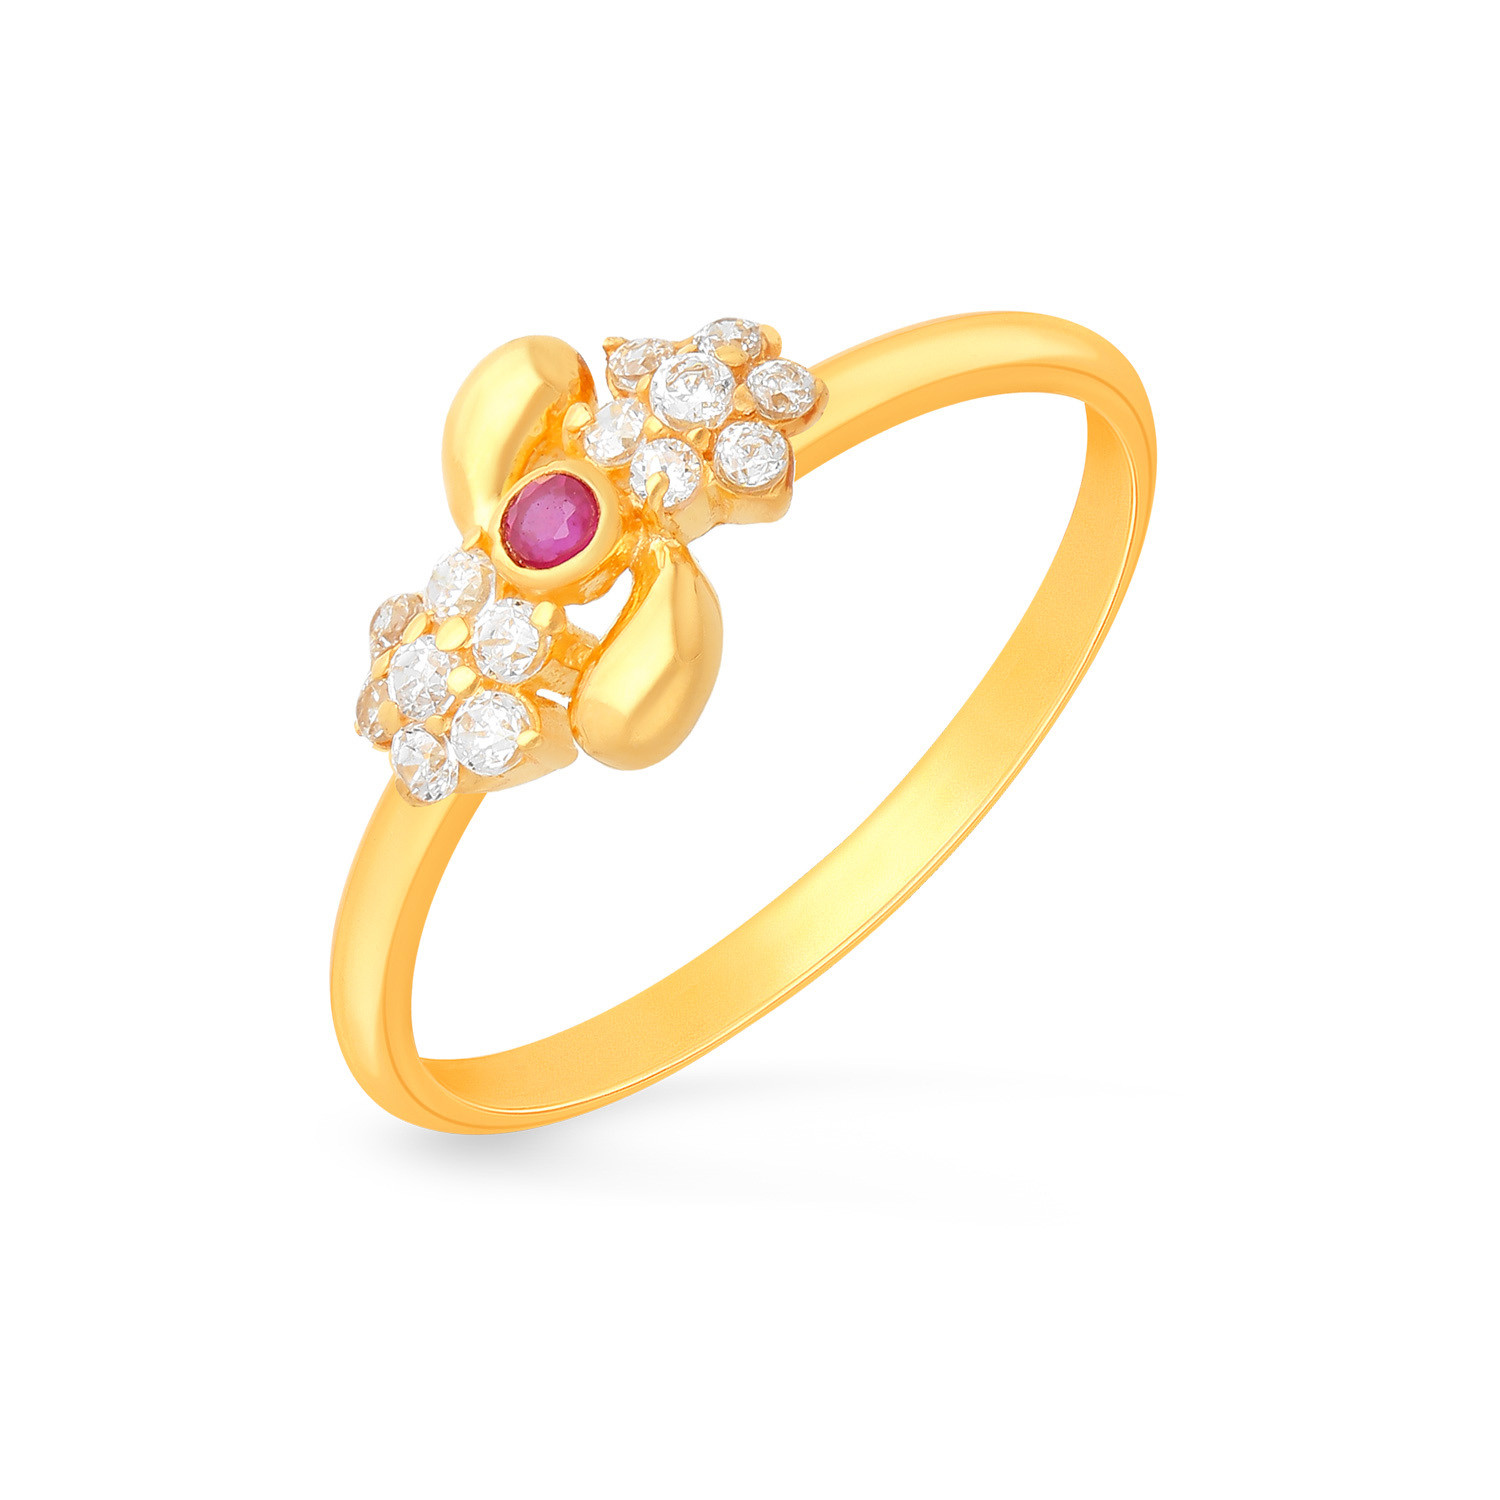 Buy Malabar Gold and Diamonds 18 KT (750) Yellow Gold Ring for Women  FRDZL30024_Y_15 at Amazon.in